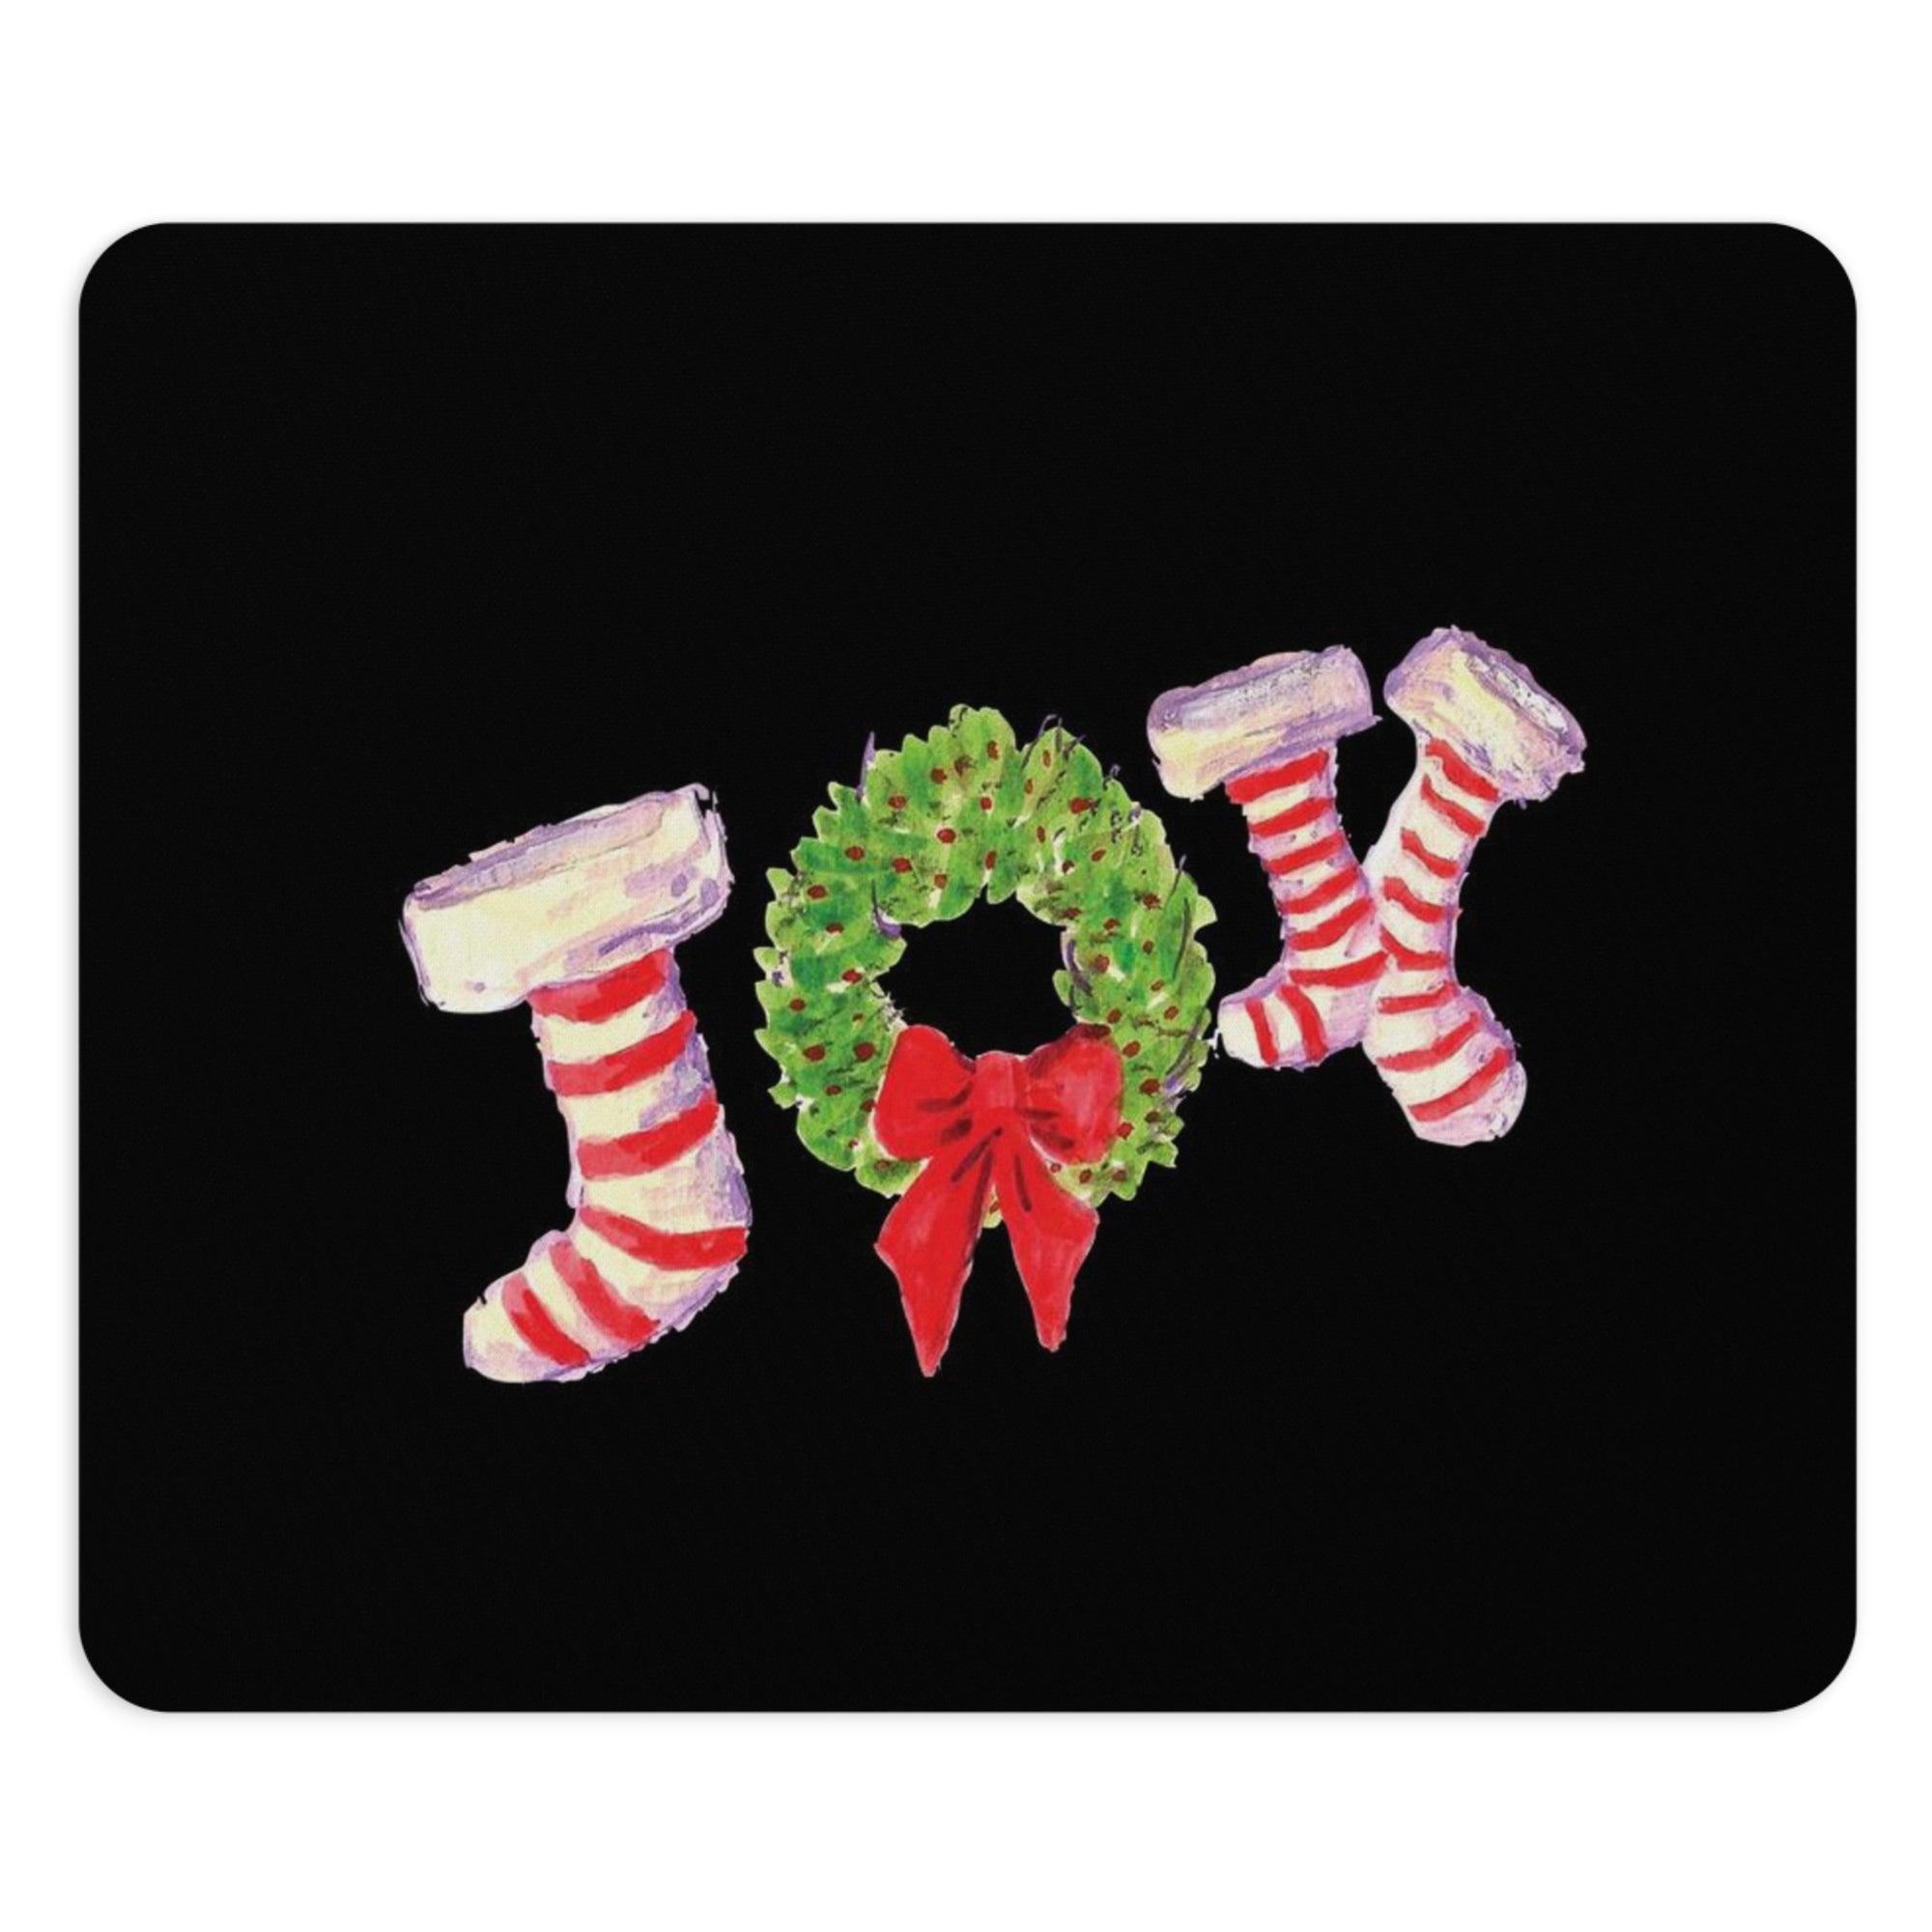 Christmas Office Mouse Pad | Mouse Pad for Work | Tech Holiday Gift | Computer Christmas Present